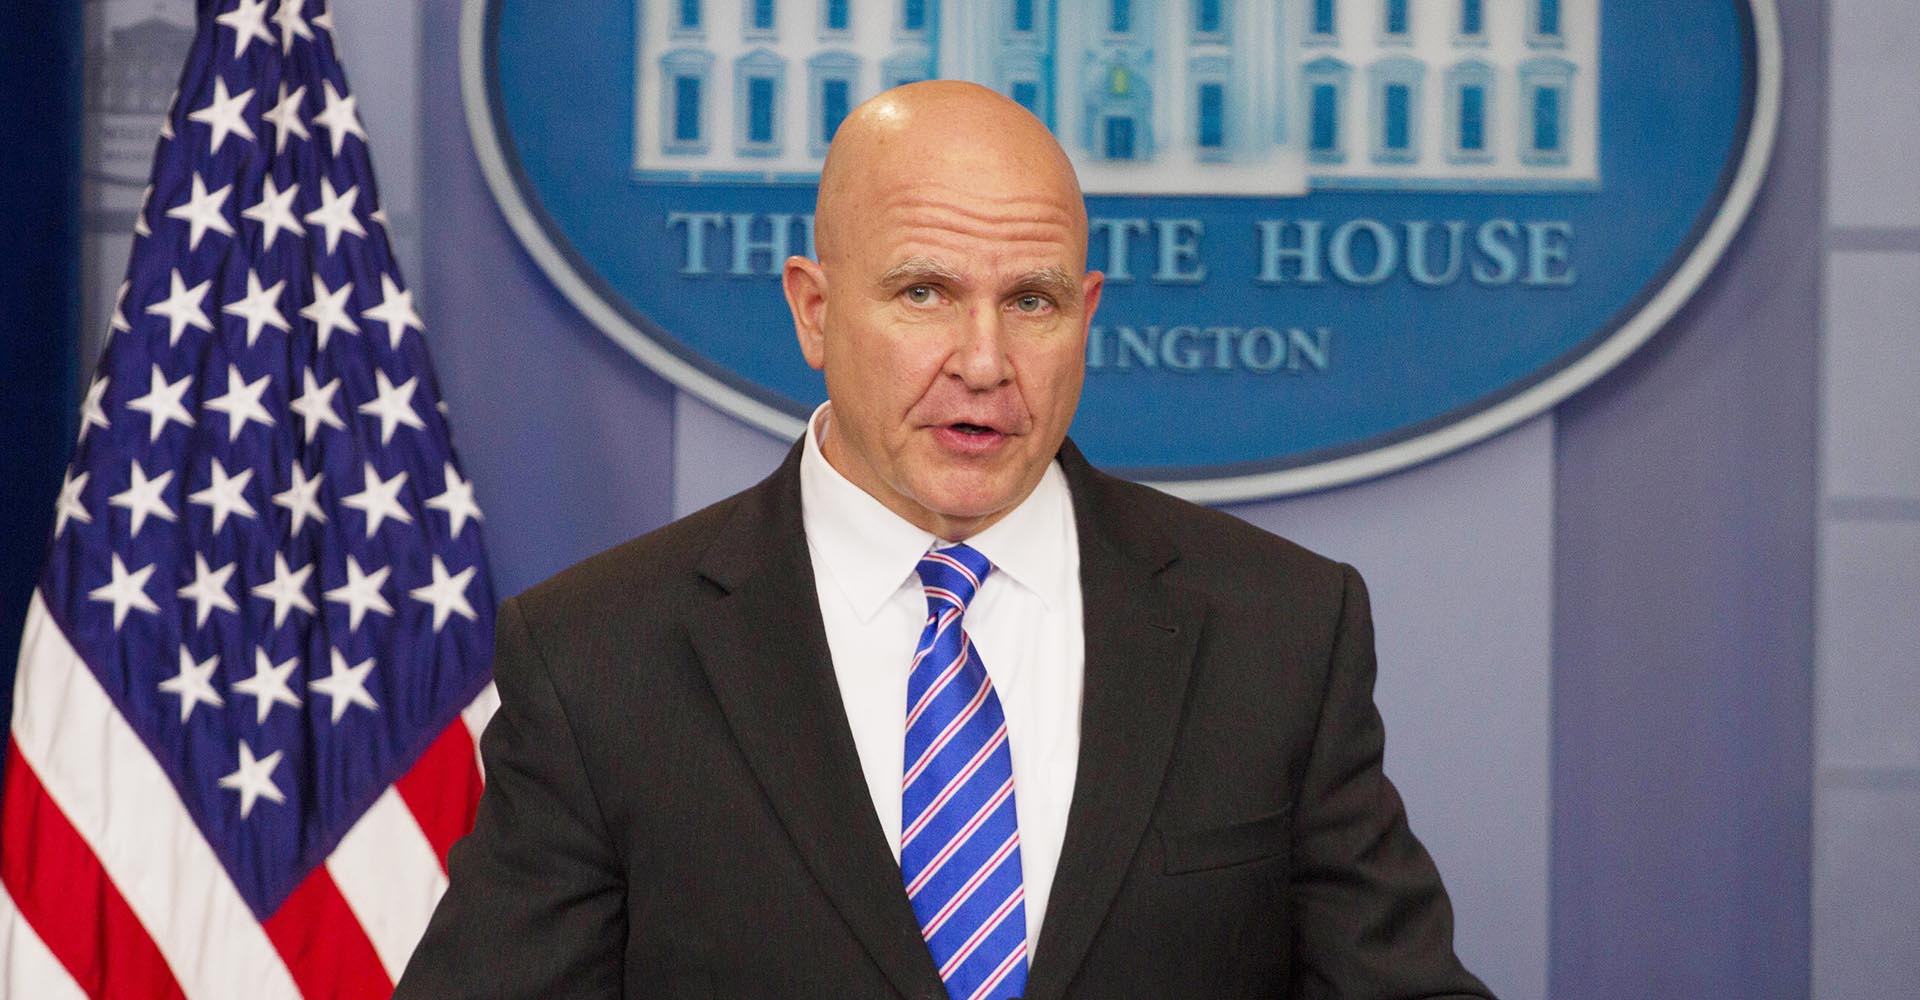 McMaster reiterates call for confidence in American democracy